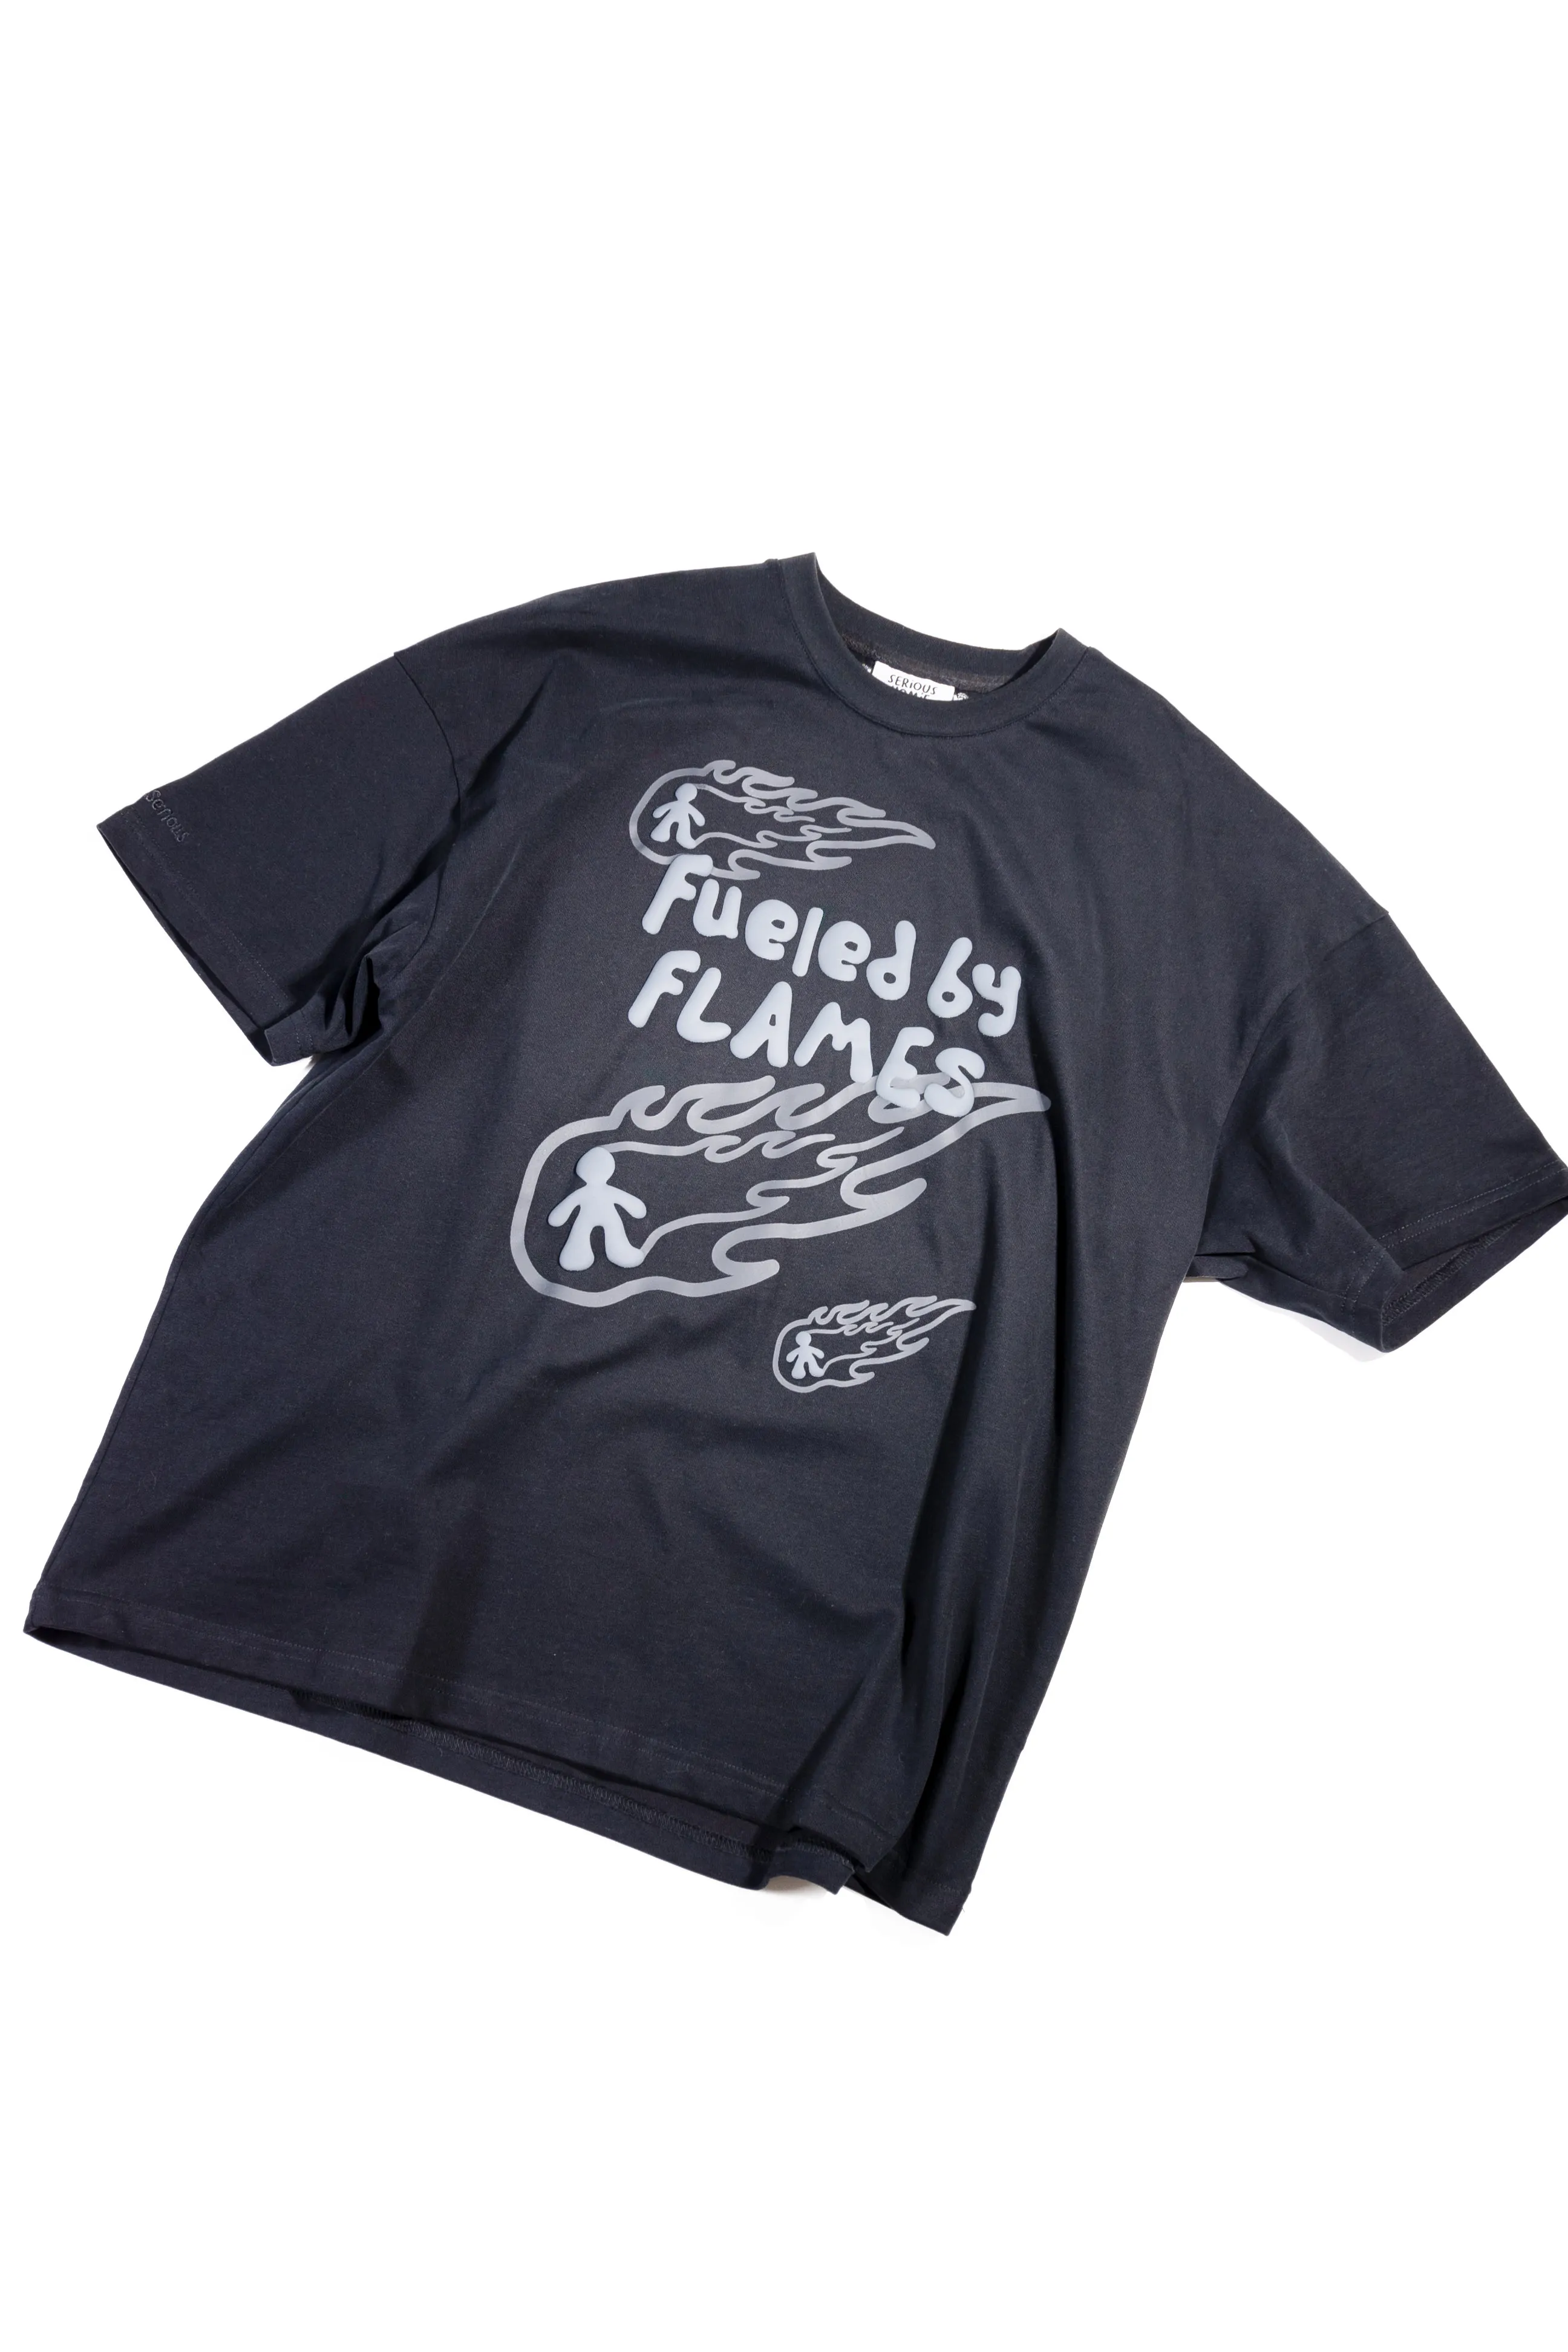 Fueled by Flames Tee (Black)